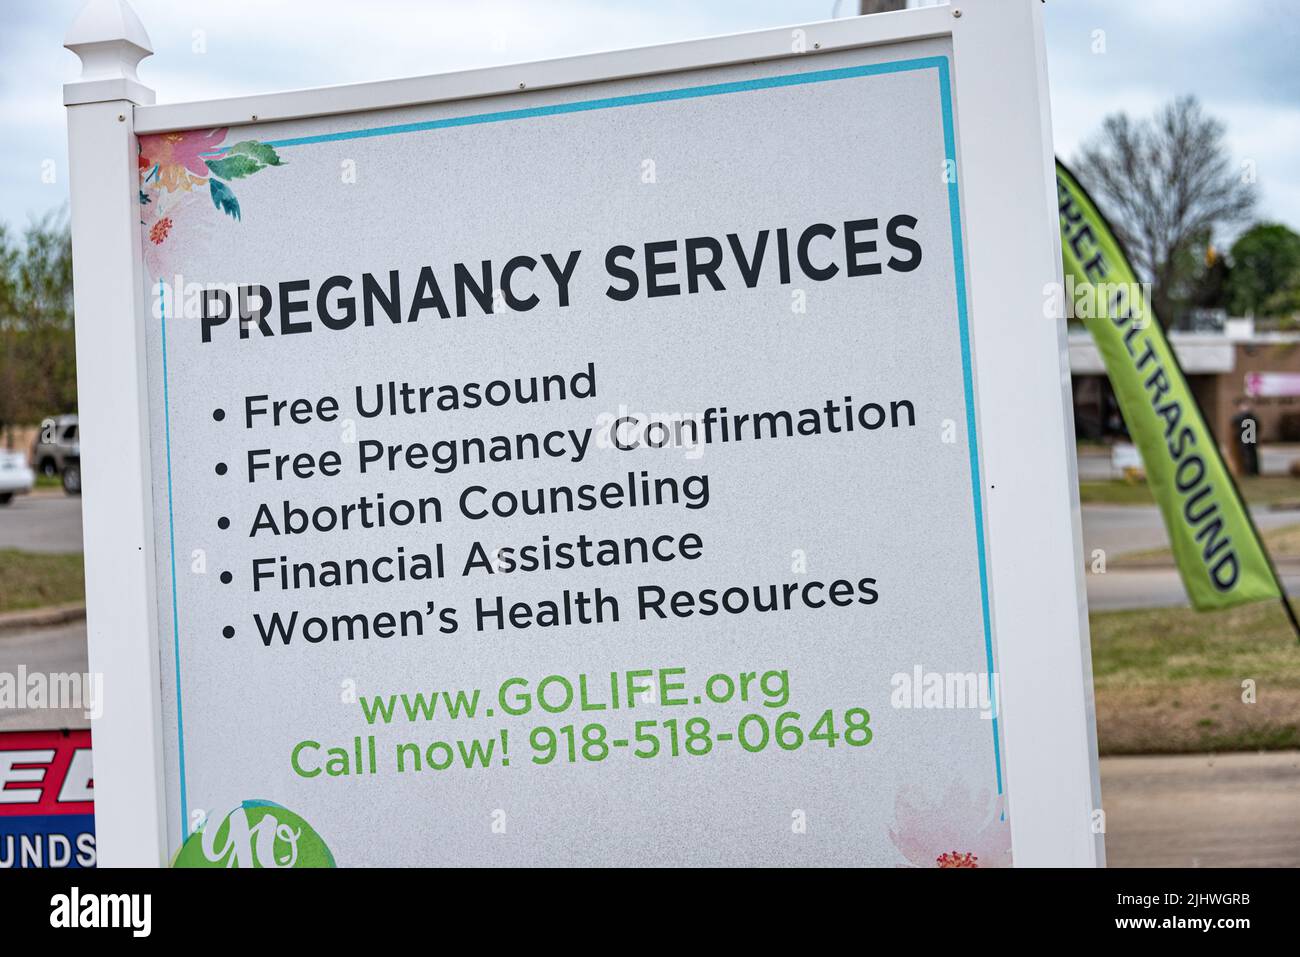 Pregnancy resource clinic offering women pregnancy confirmation, free ultrasounds, counseling, and financial assistance in Tulsa, Oklahoma. (USA) Stock Photo